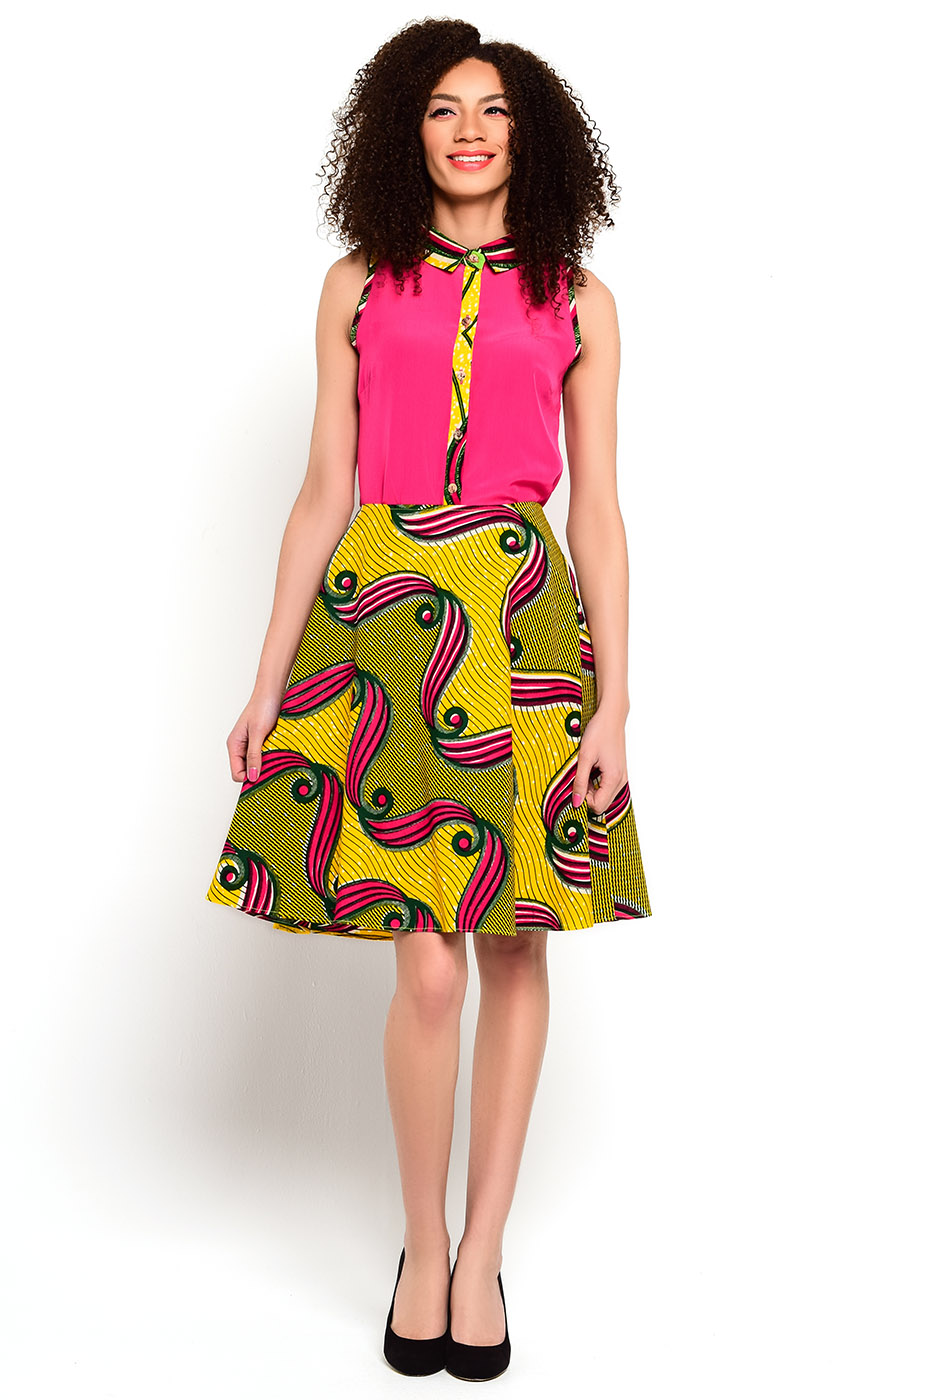 For the love of African prints: Mam-Maw fashion